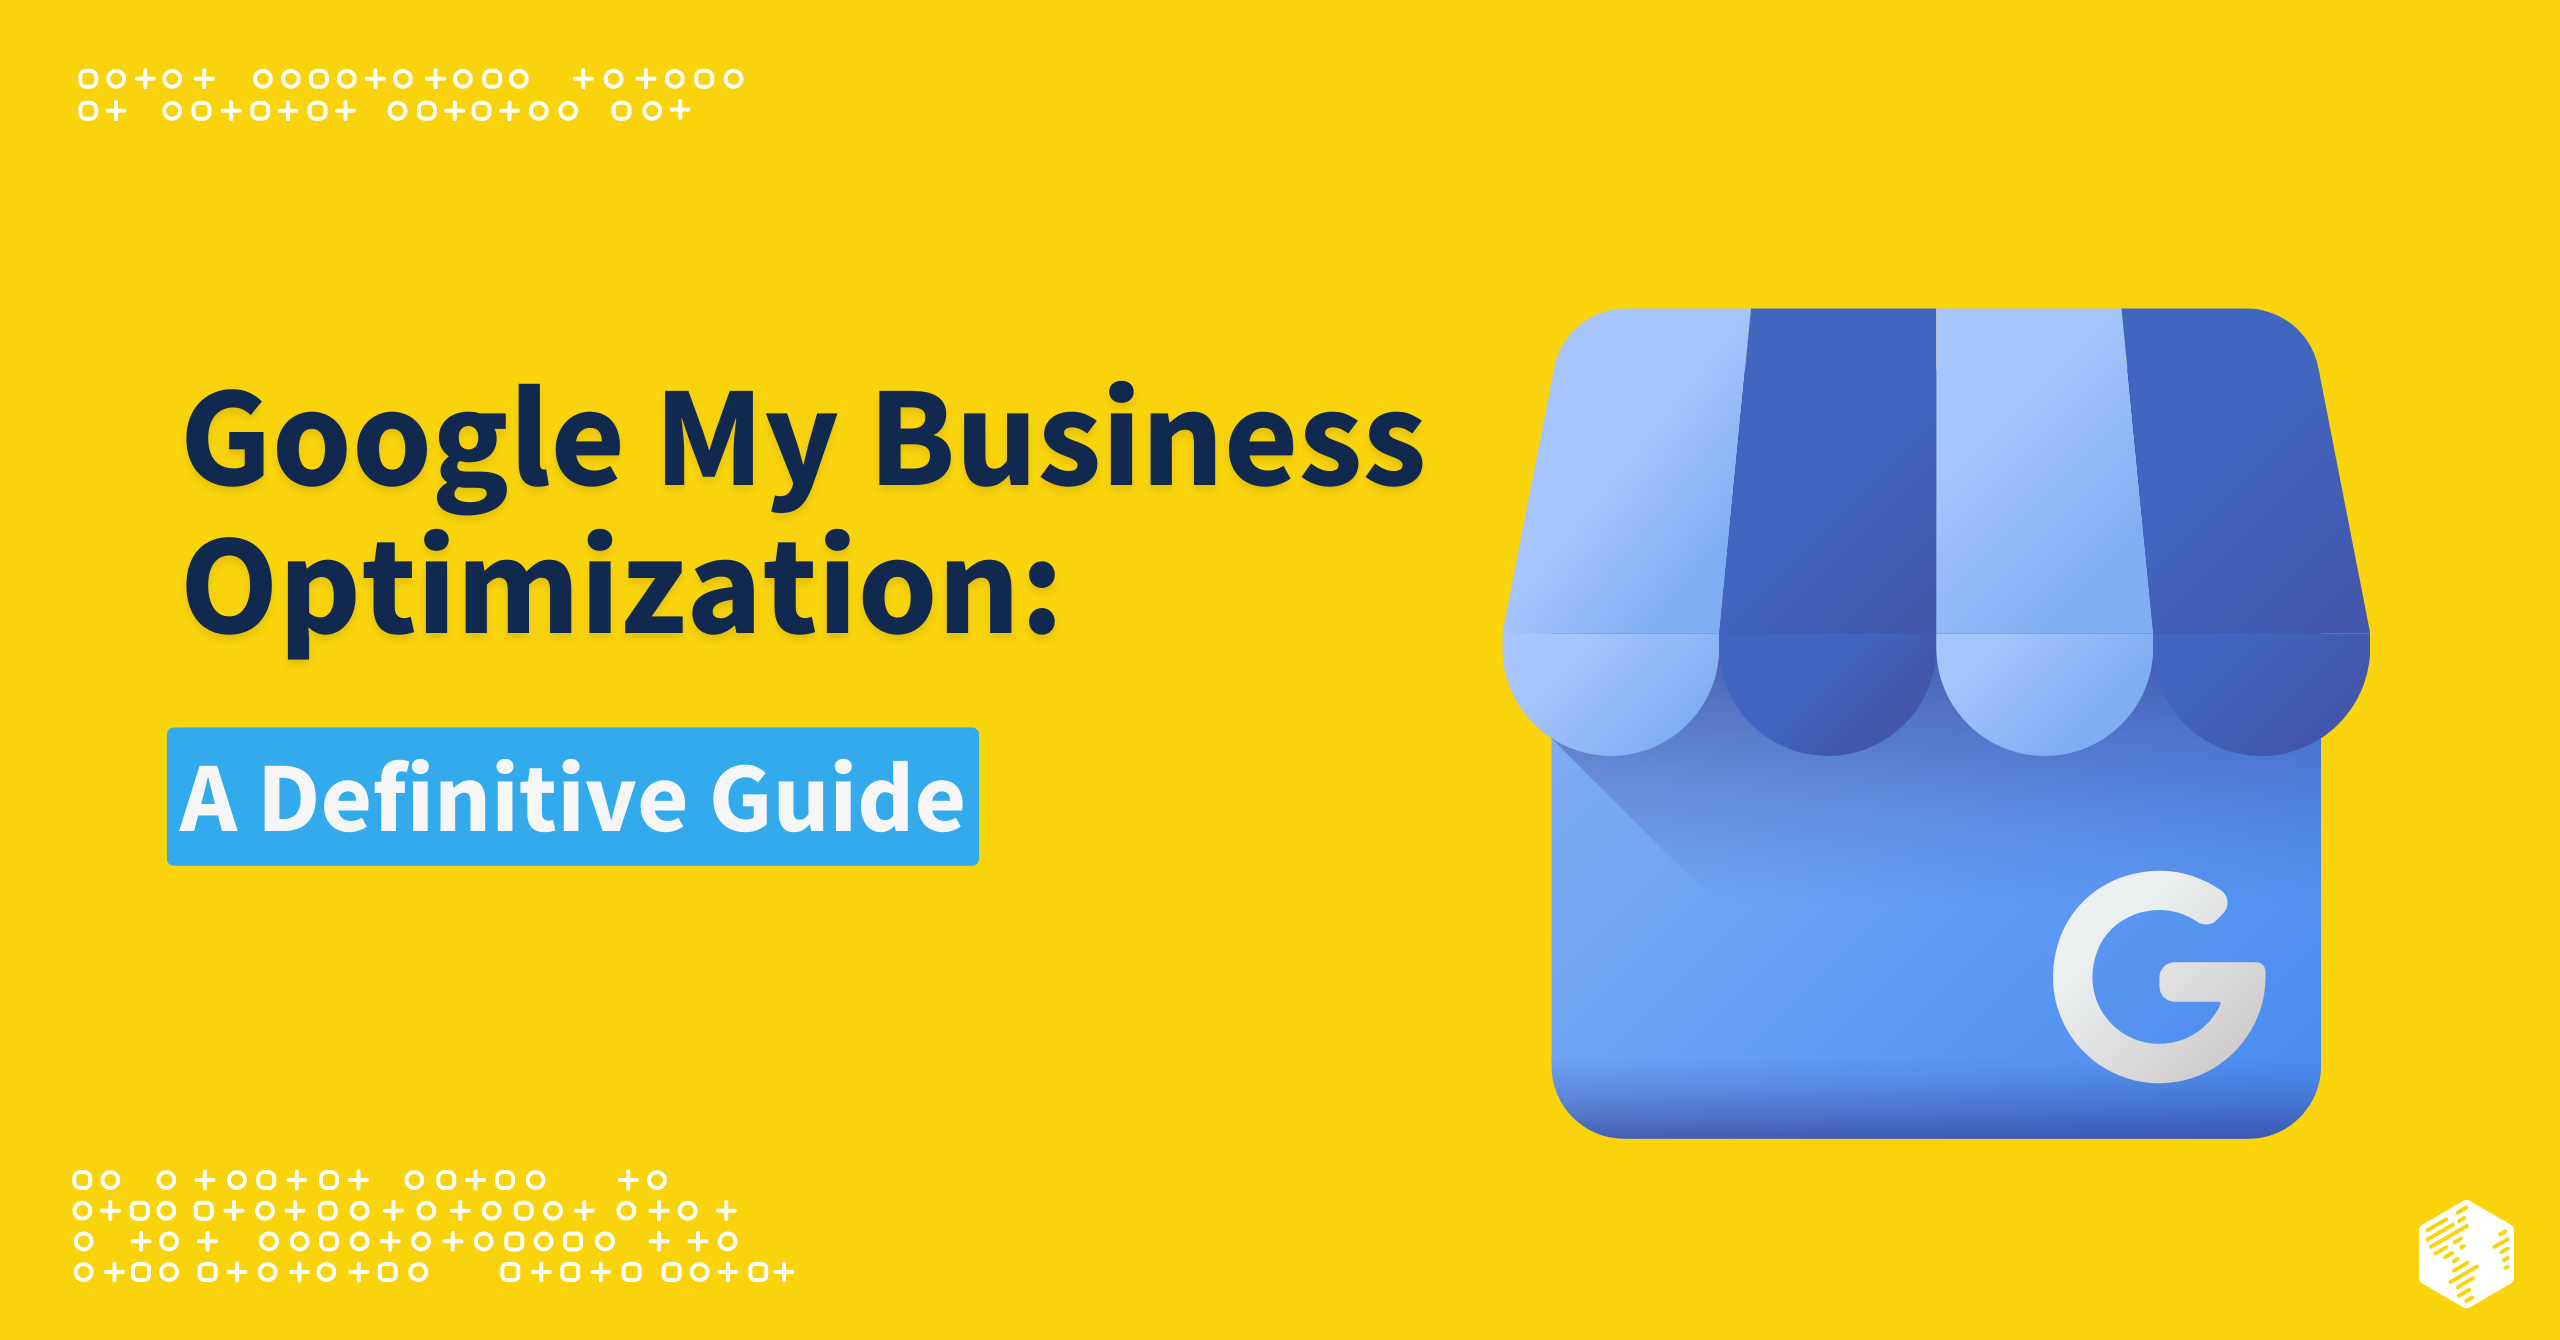 Google My Business Optimization Tips: A Definitive Guide